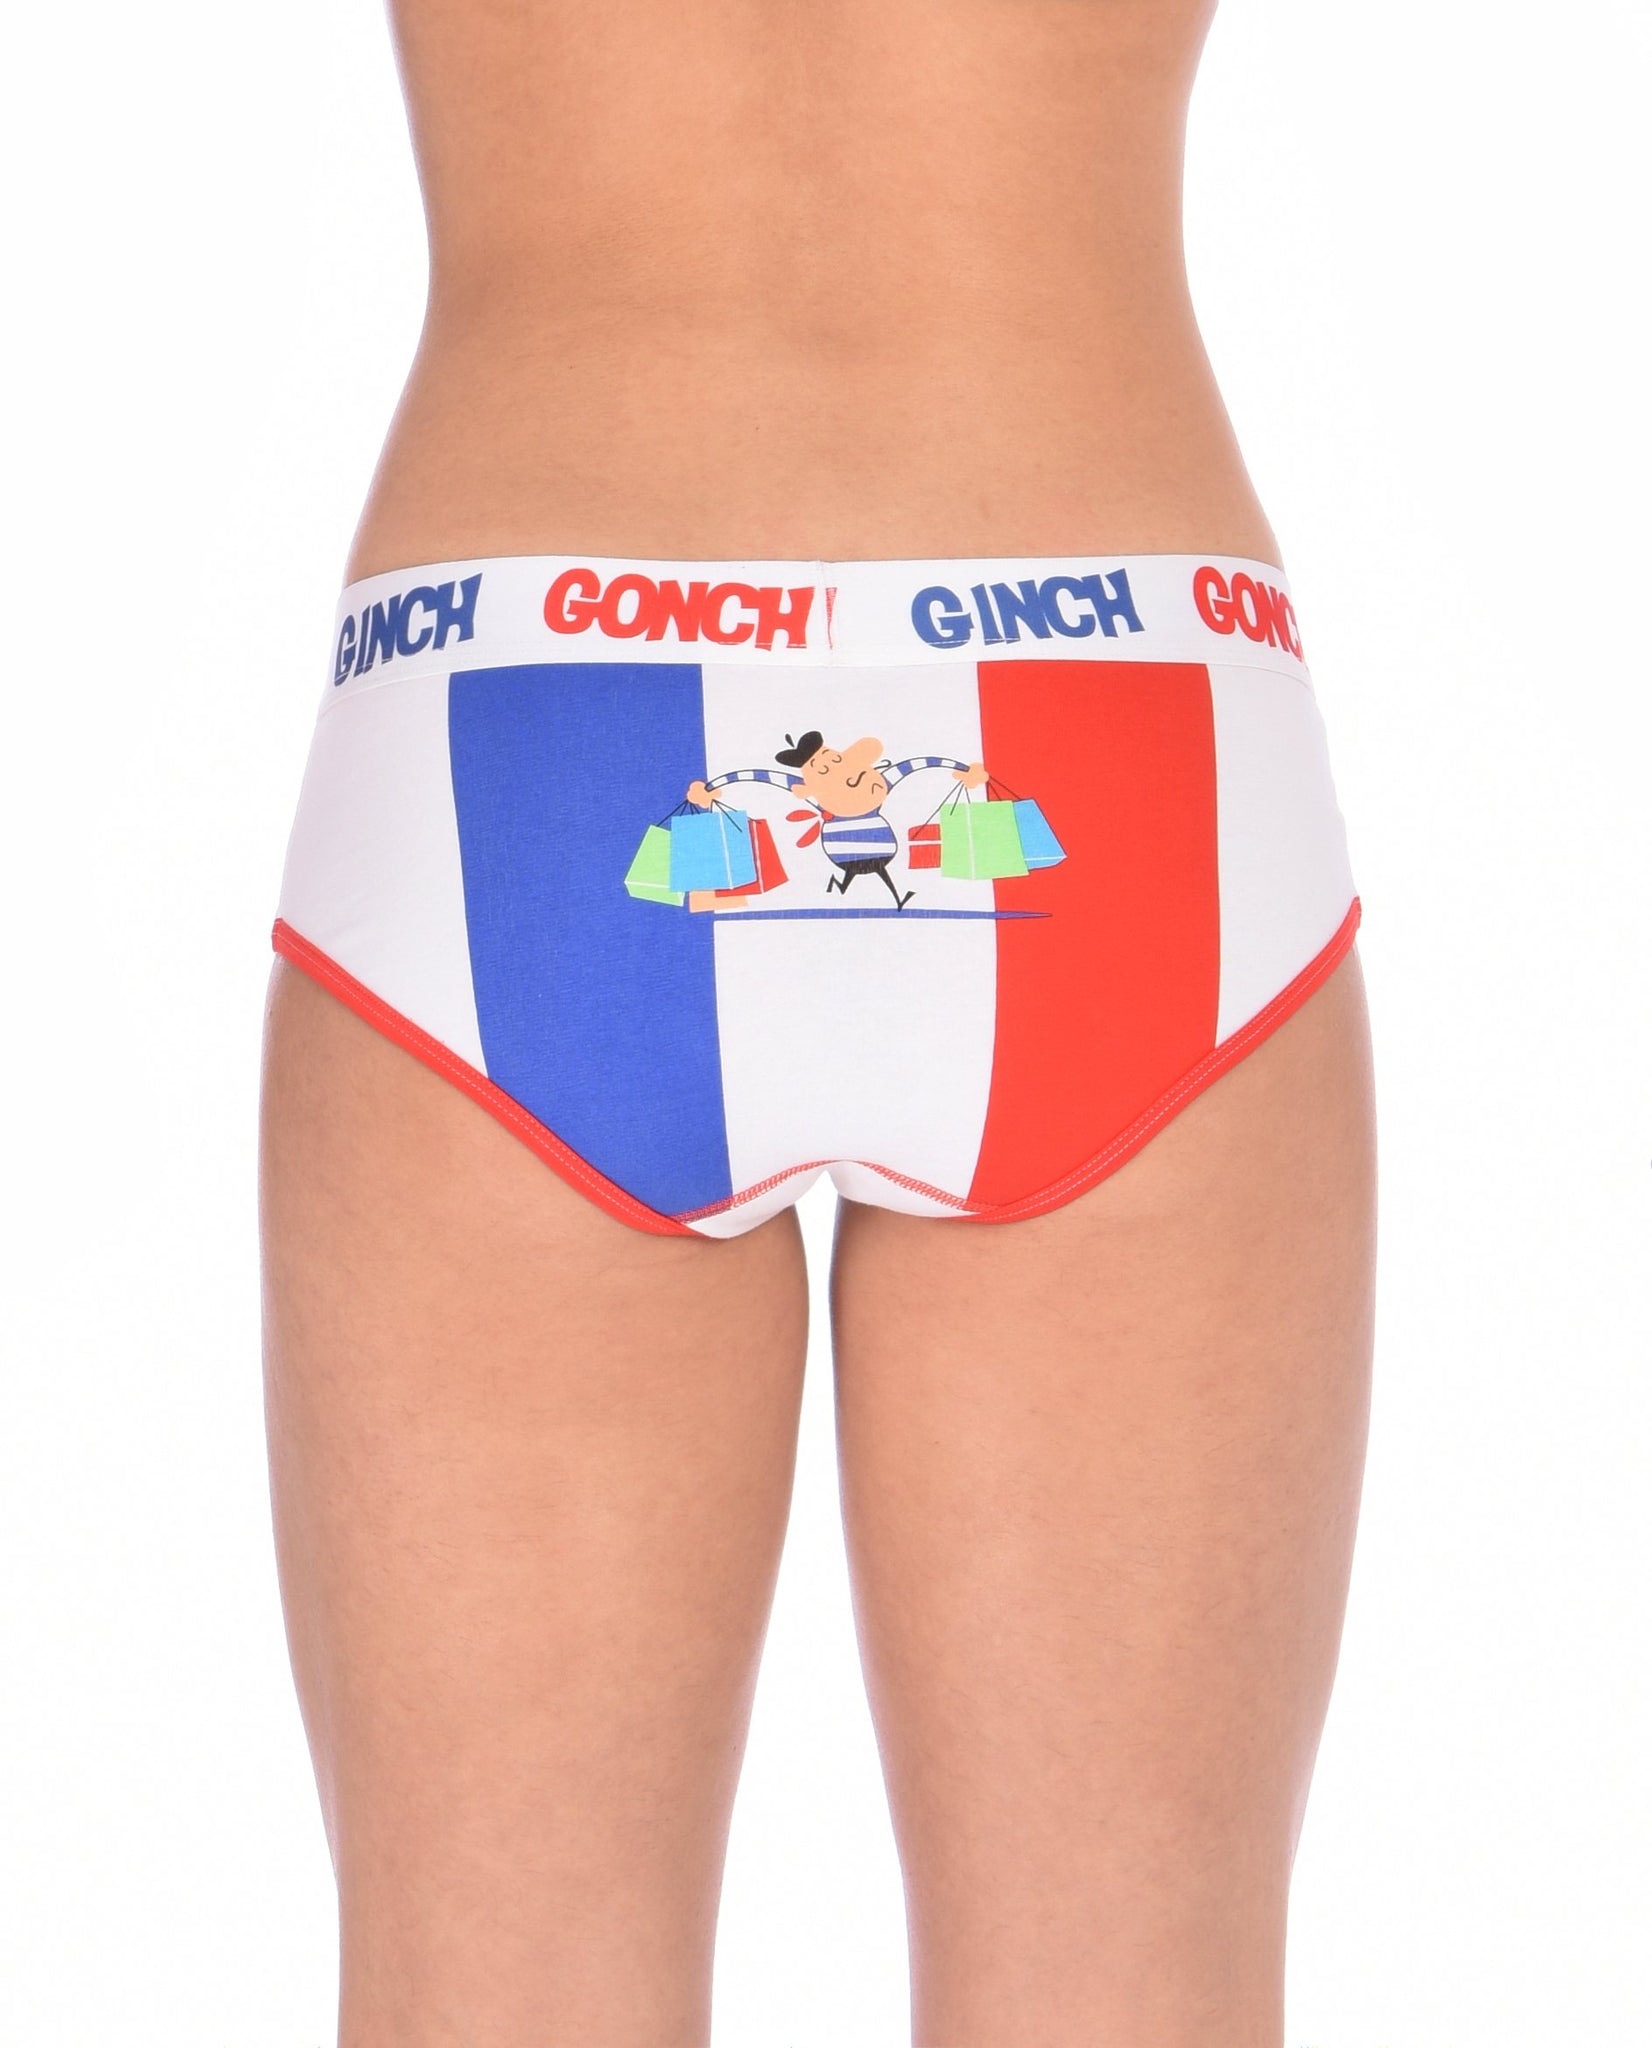 GG Ginch Gonch I Love Paris boy cut Brief - y front women's Underwear white fabric with scene of french flag and french person red and white trim and white printed waistband front